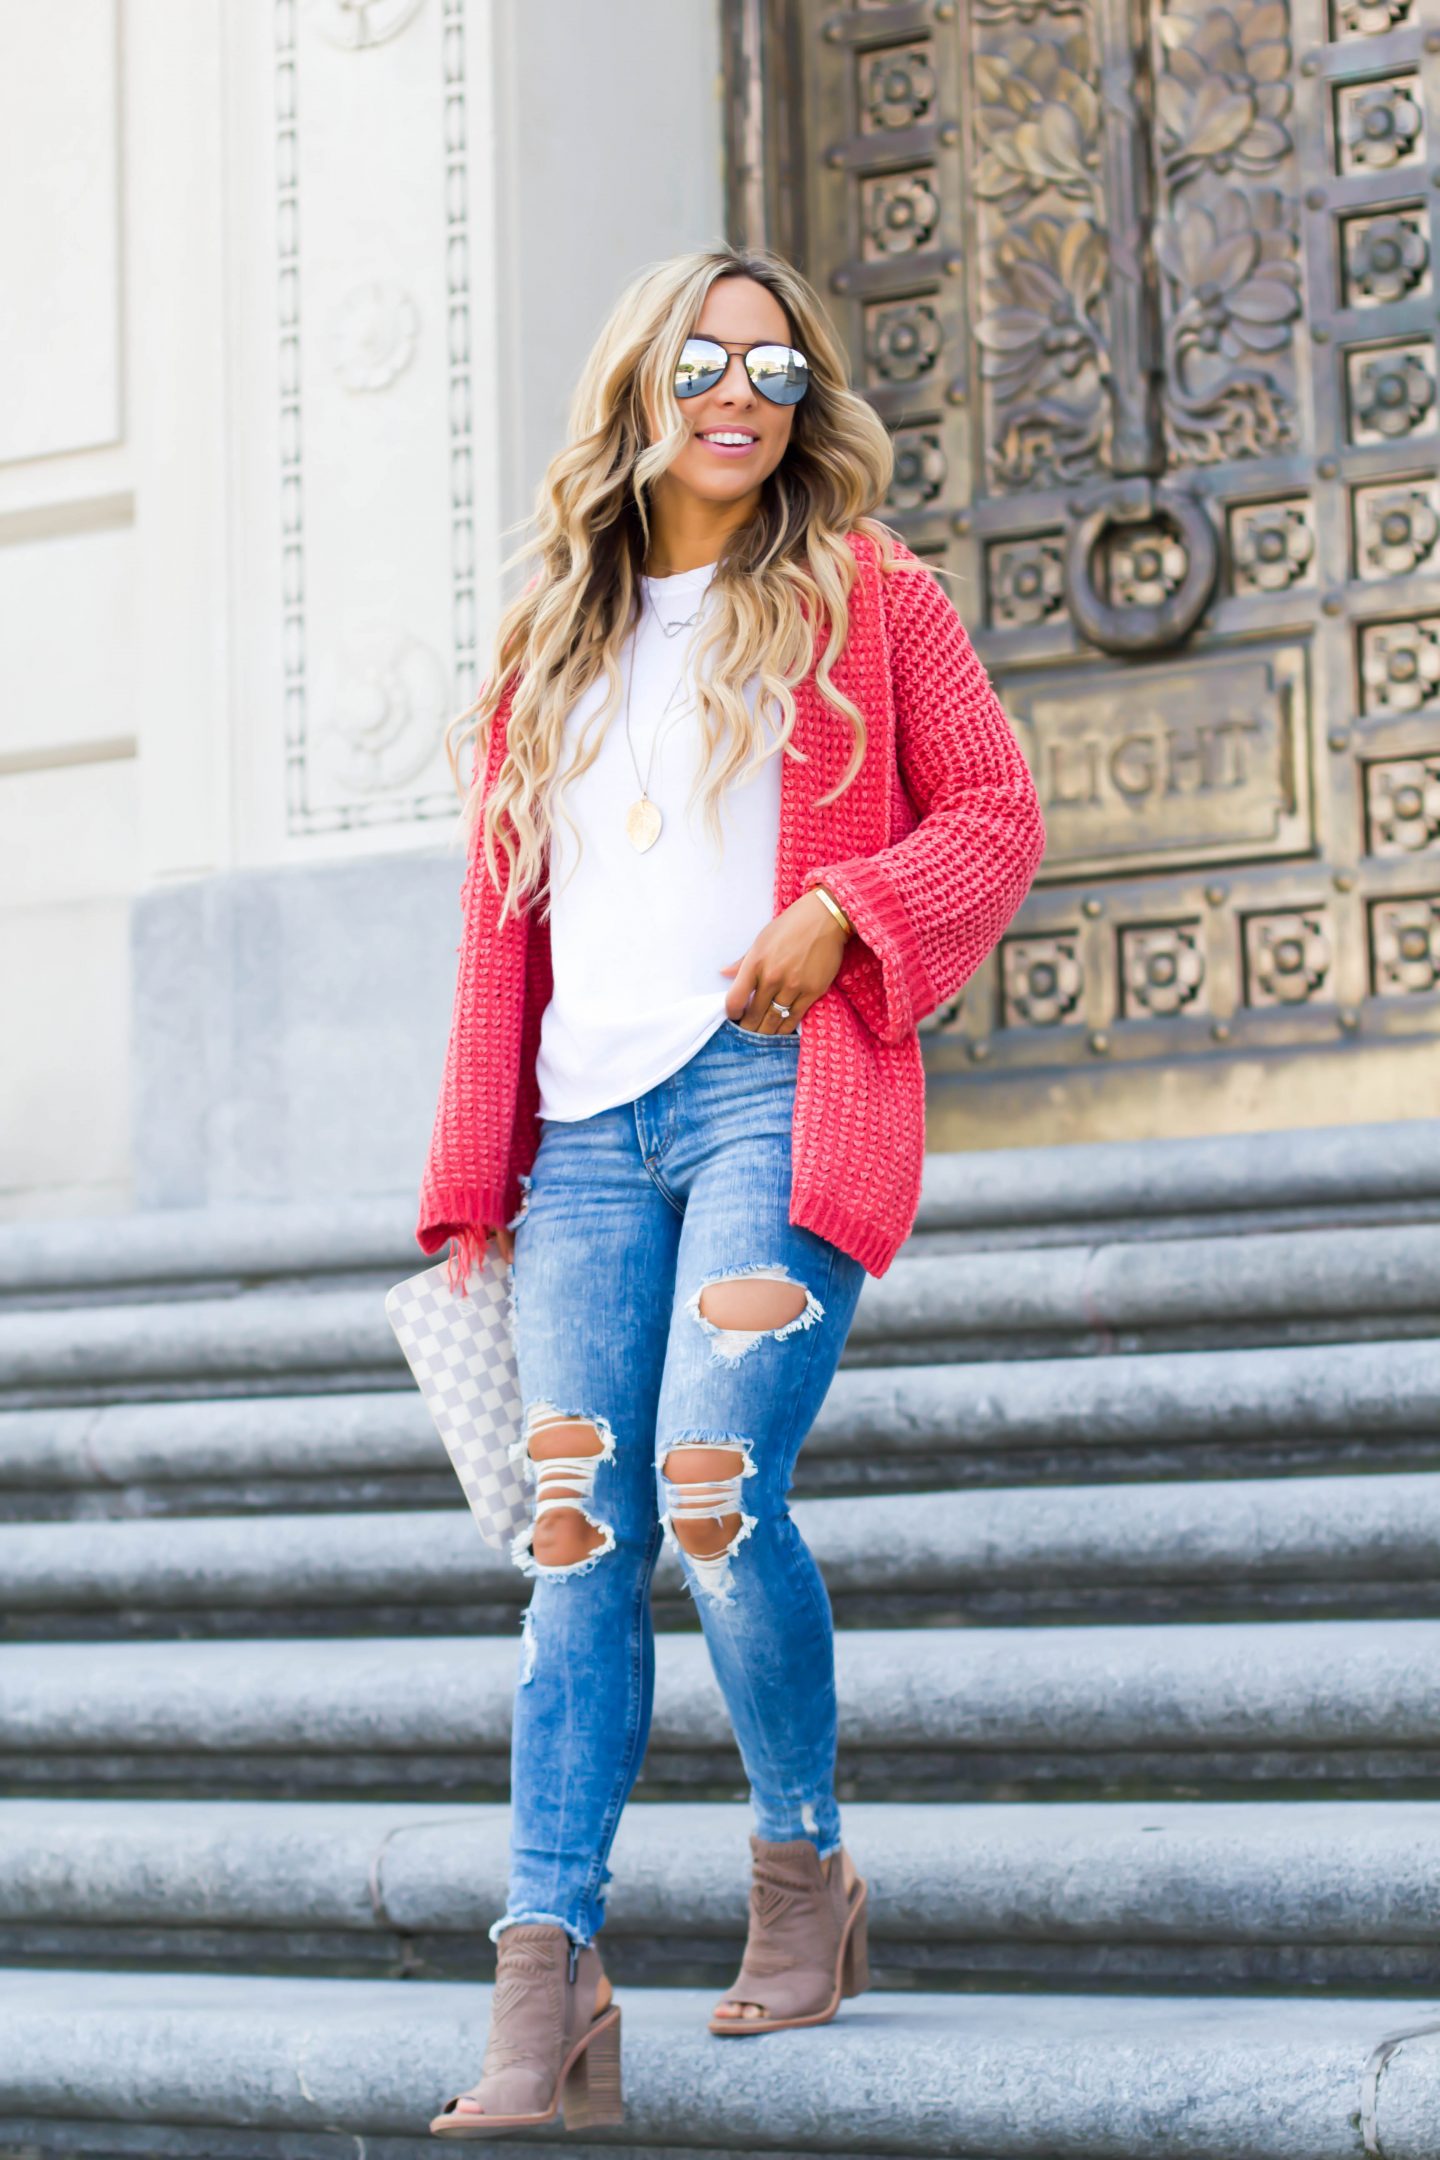 Cozy Cardi & Best Ripped Jeans - According to Blaire